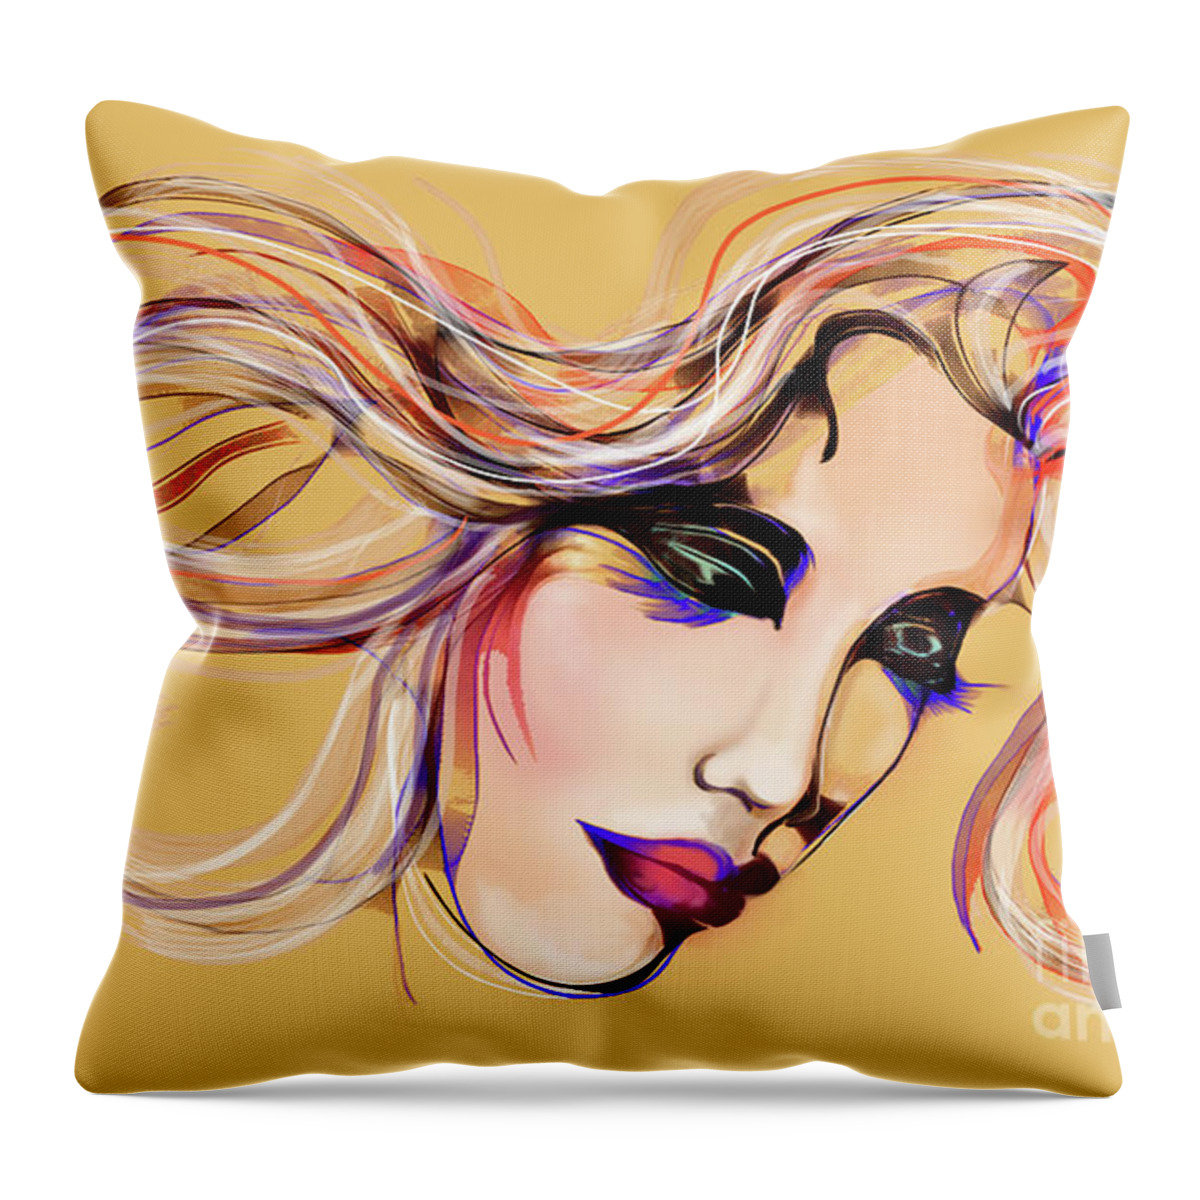 Equestrian Art Throw Pillow featuring the digital art Face of Serenity by Stacey Mayer by Stacey Mayer